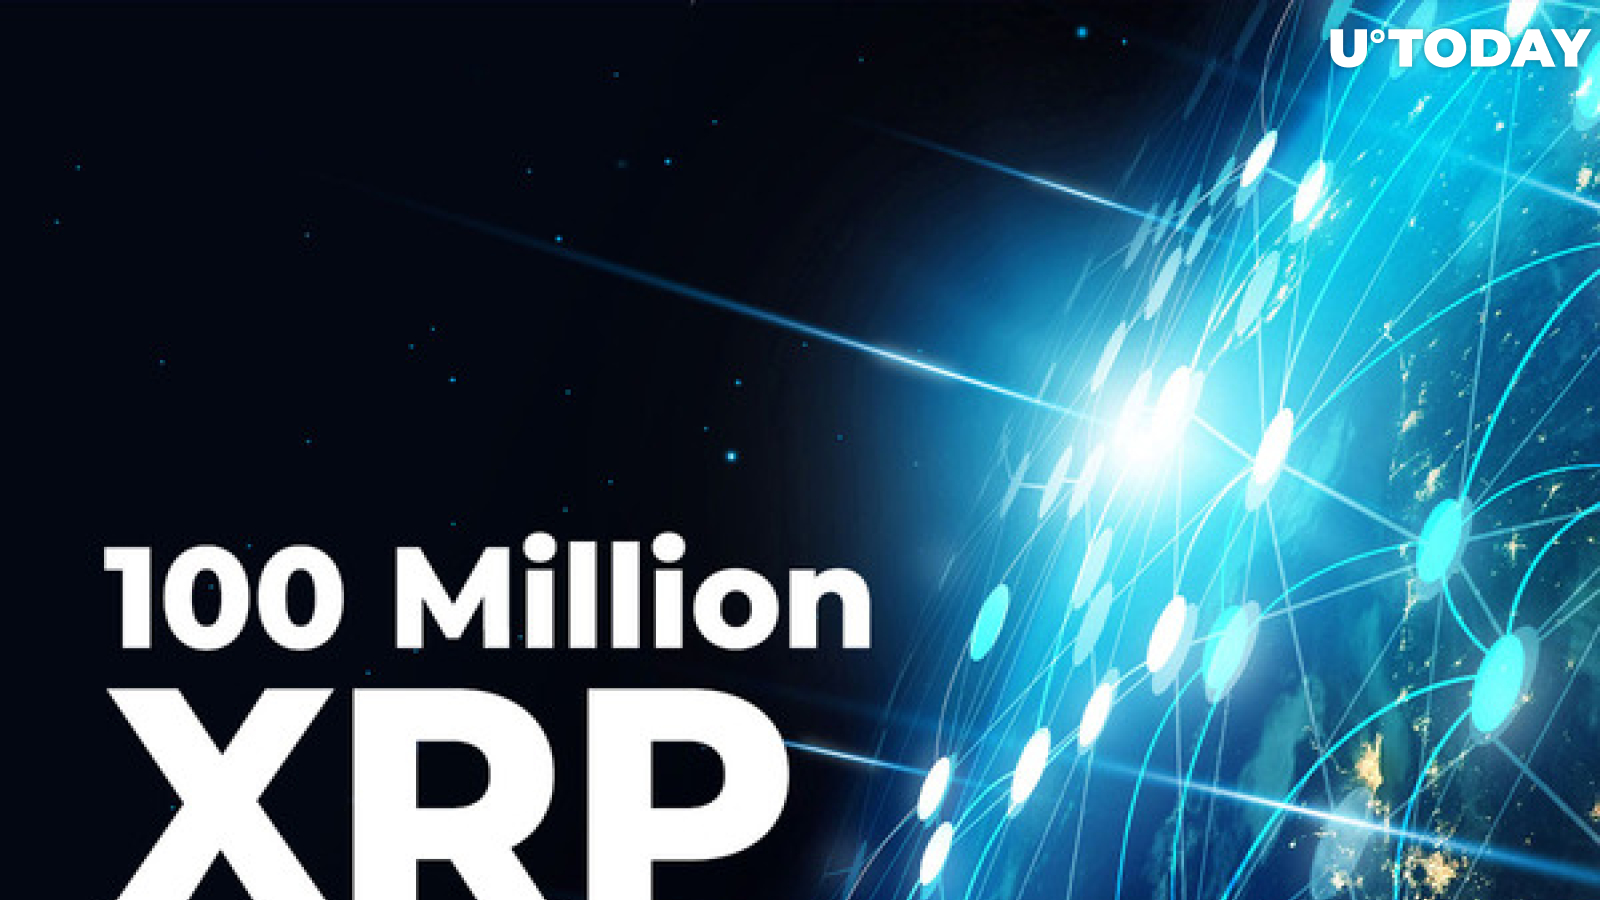 Ripple Helps Shift 100 Million XRP Between Major Crypto Exchanges